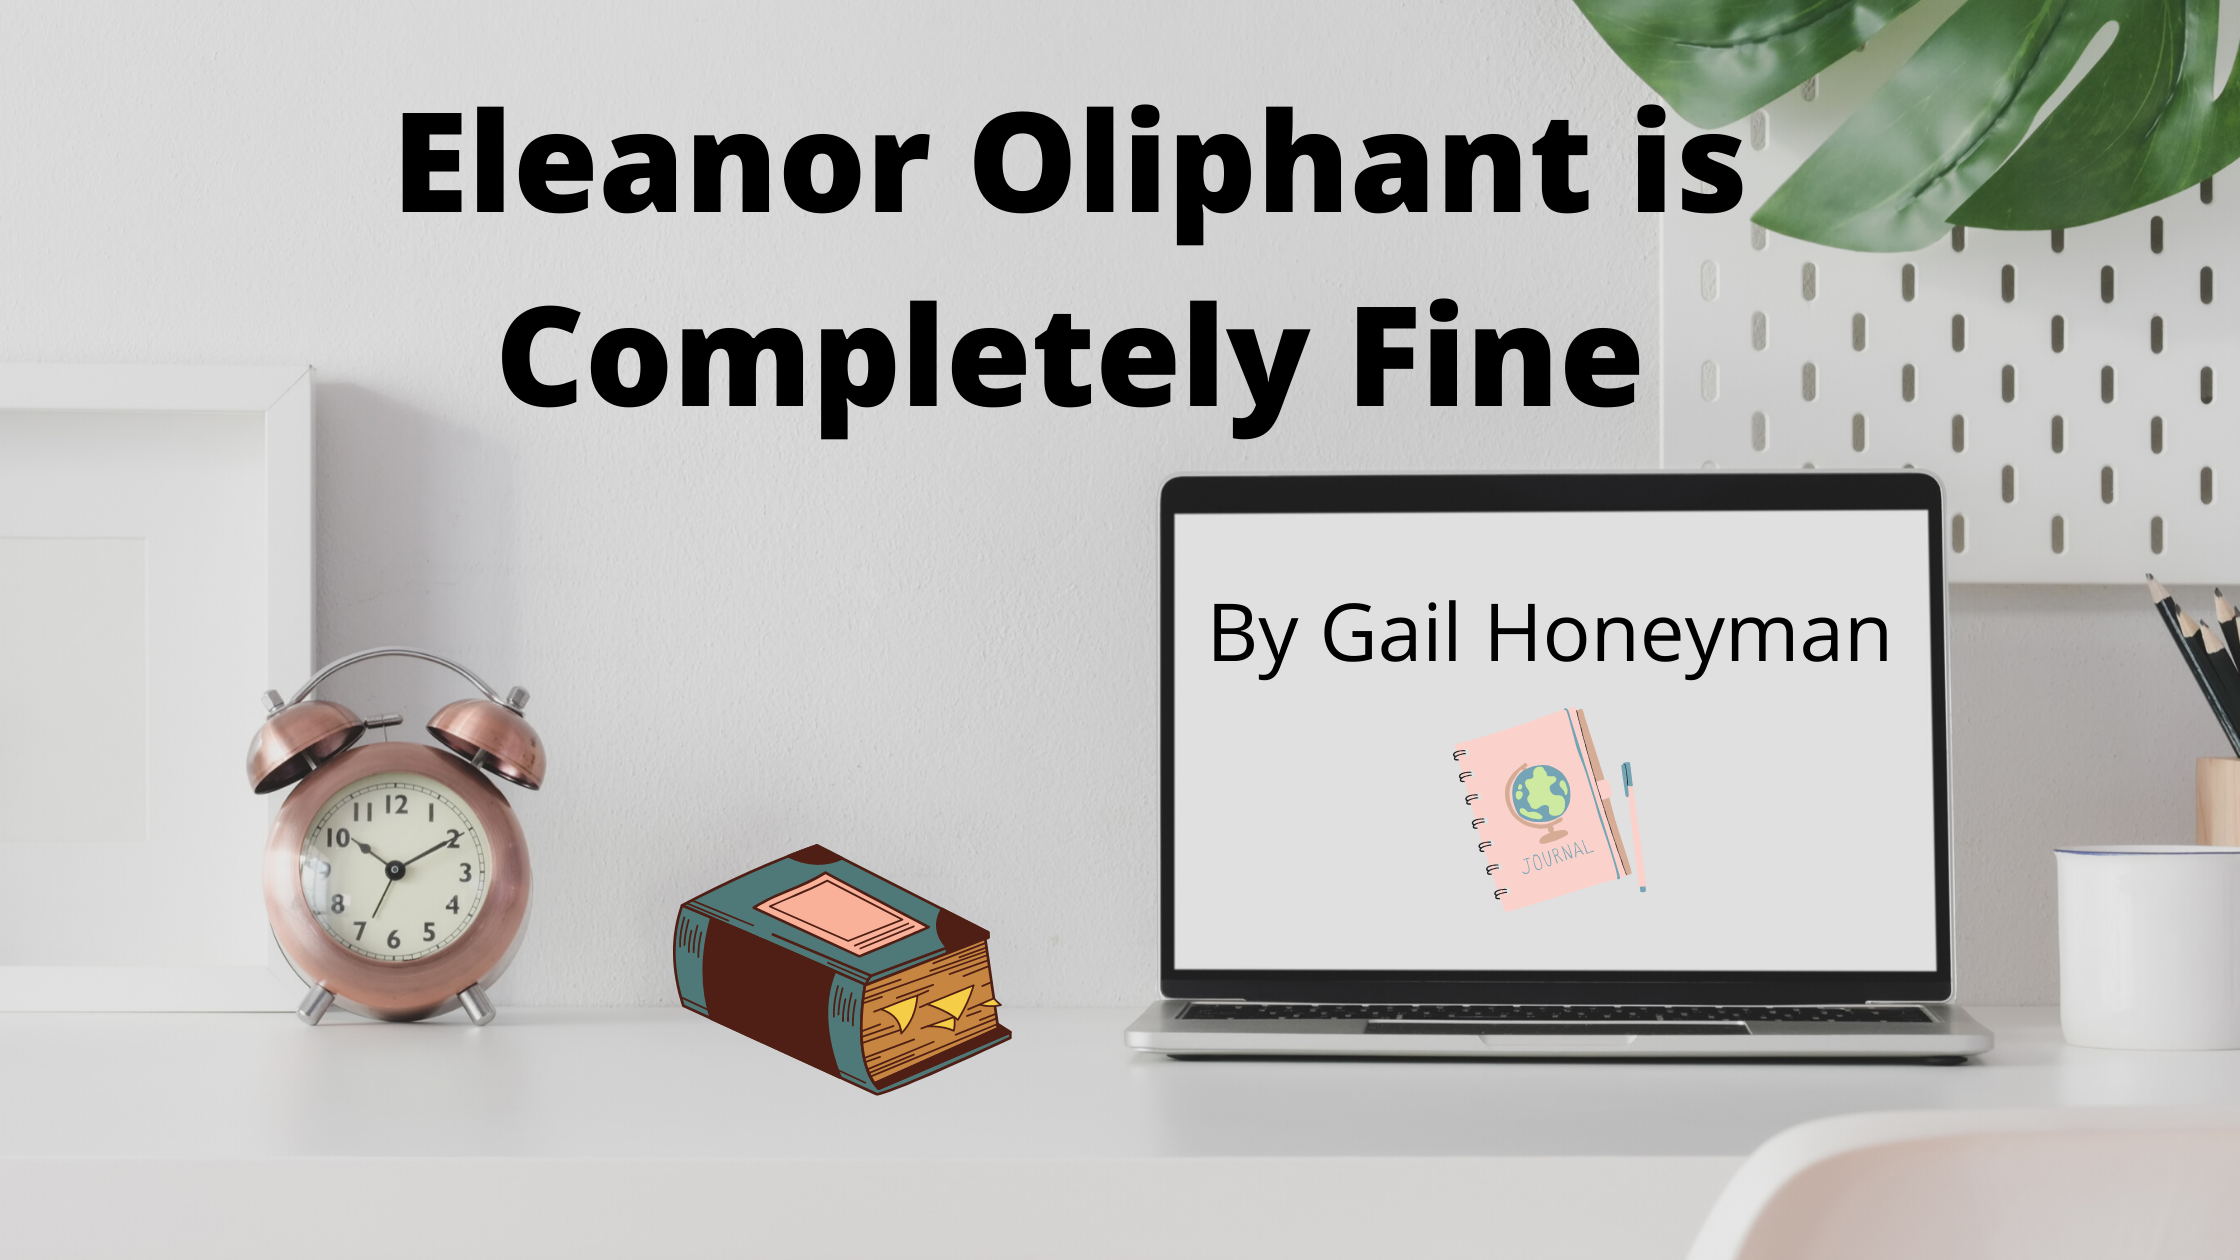 Book Review: Eleanor Oliphant is Completely Fine